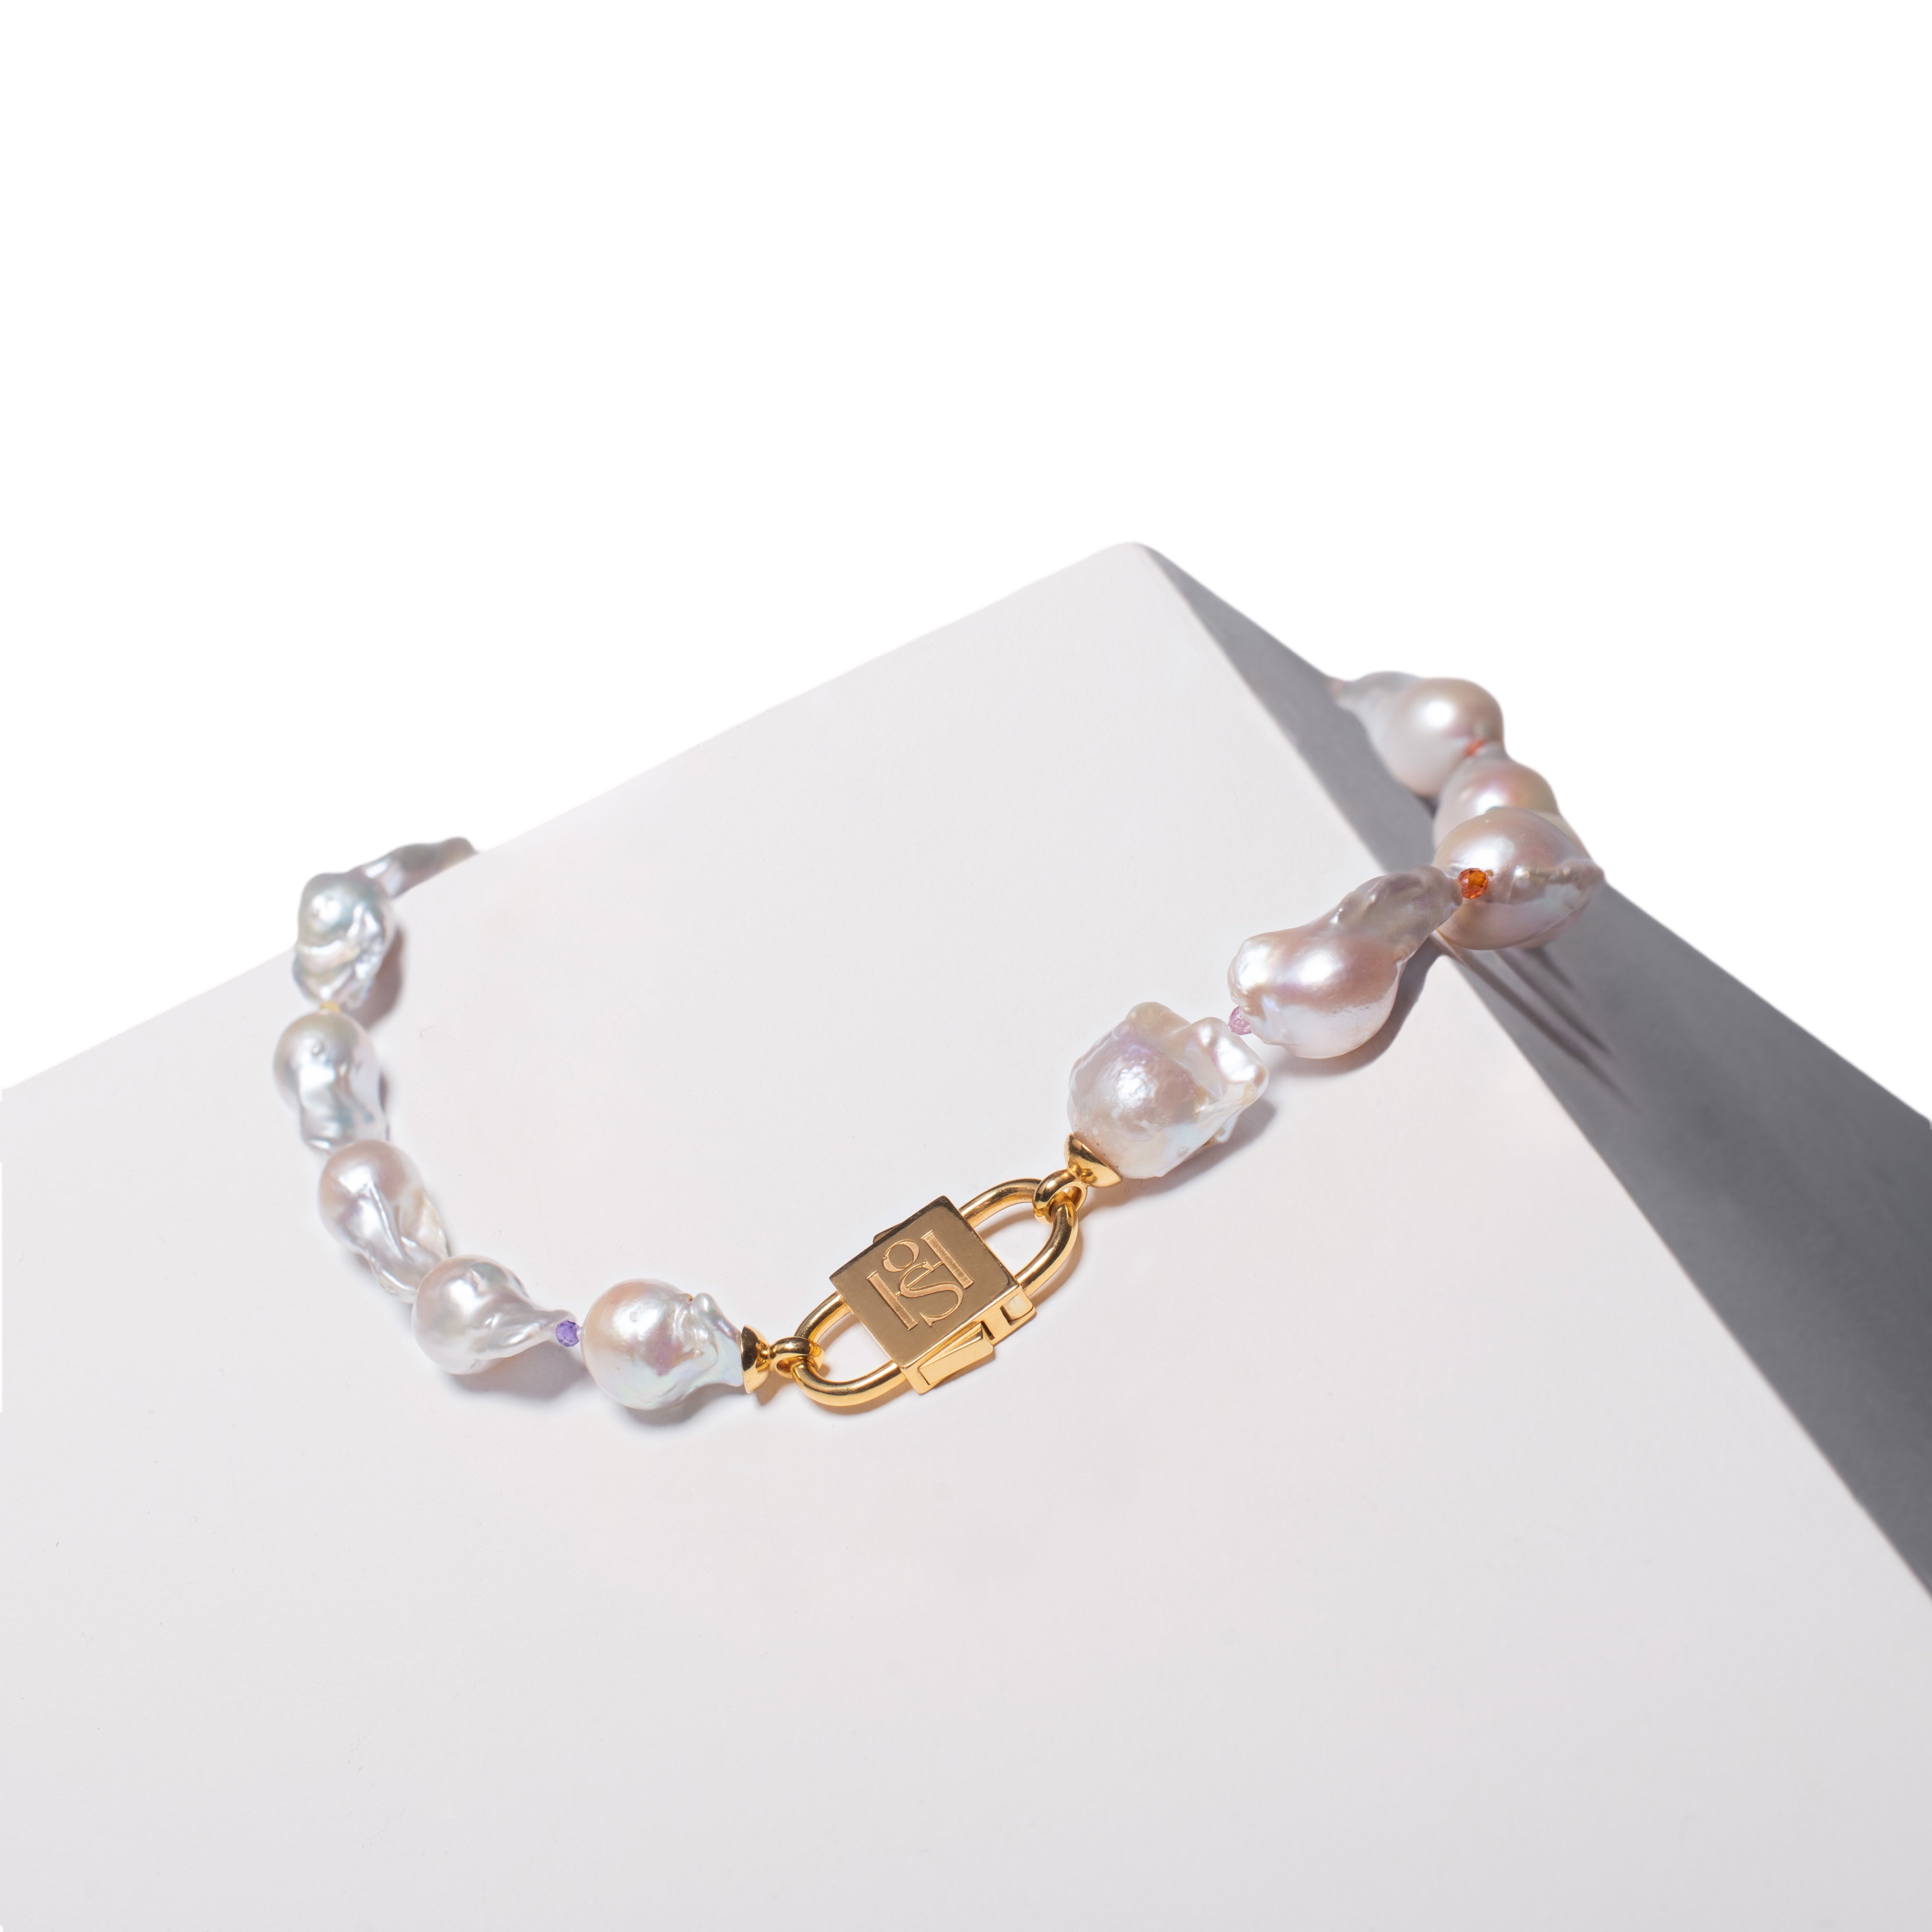 House of Sol Baroque Pearl Necklace with 24K Gold Filled HoS Lock For Sale